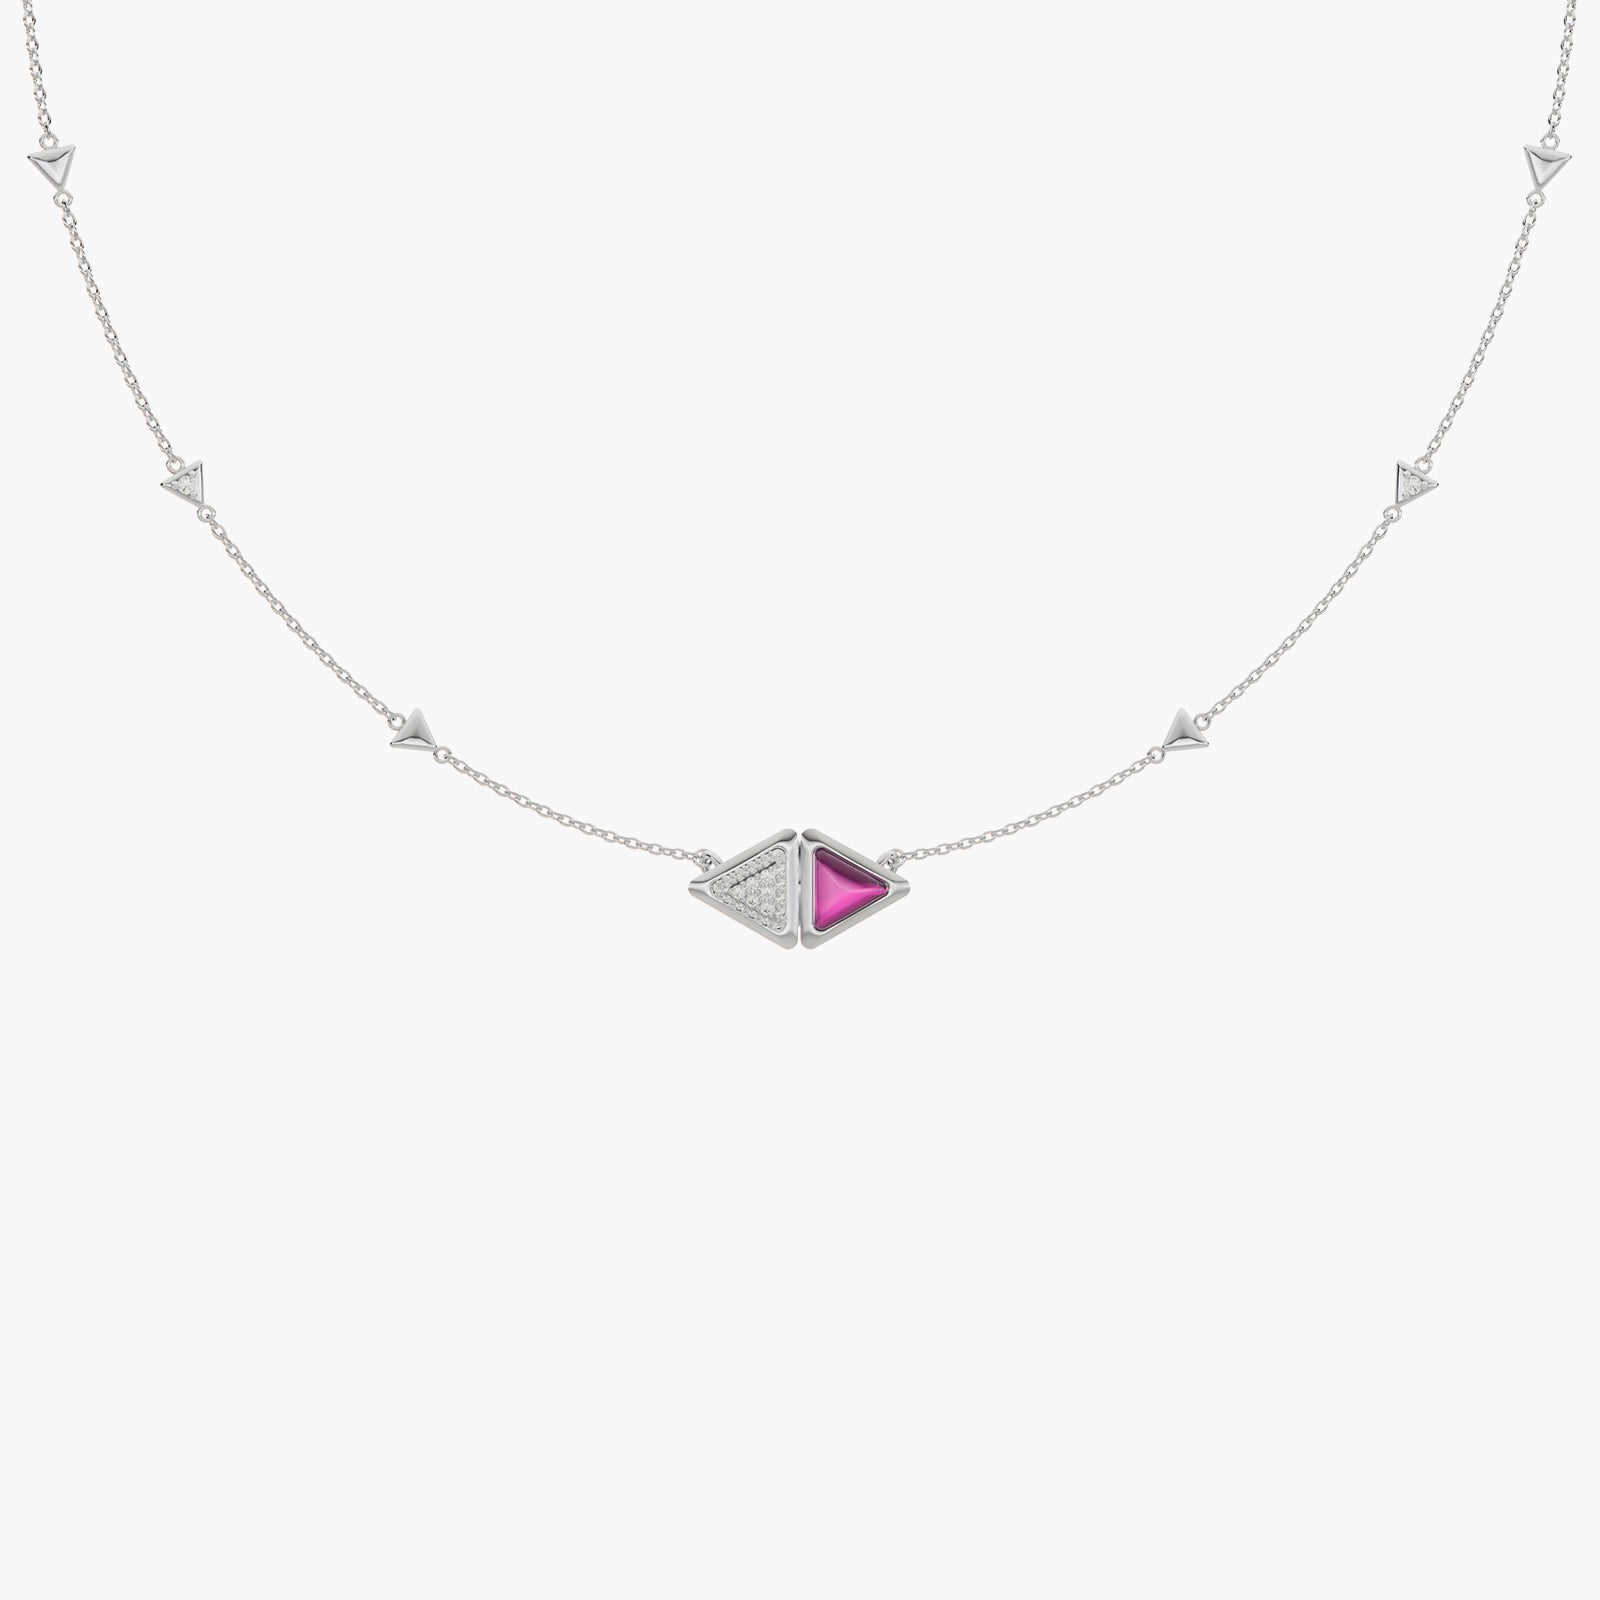 Necklace Mirror Exquisite White Gold Pink Garnet and Diamonds